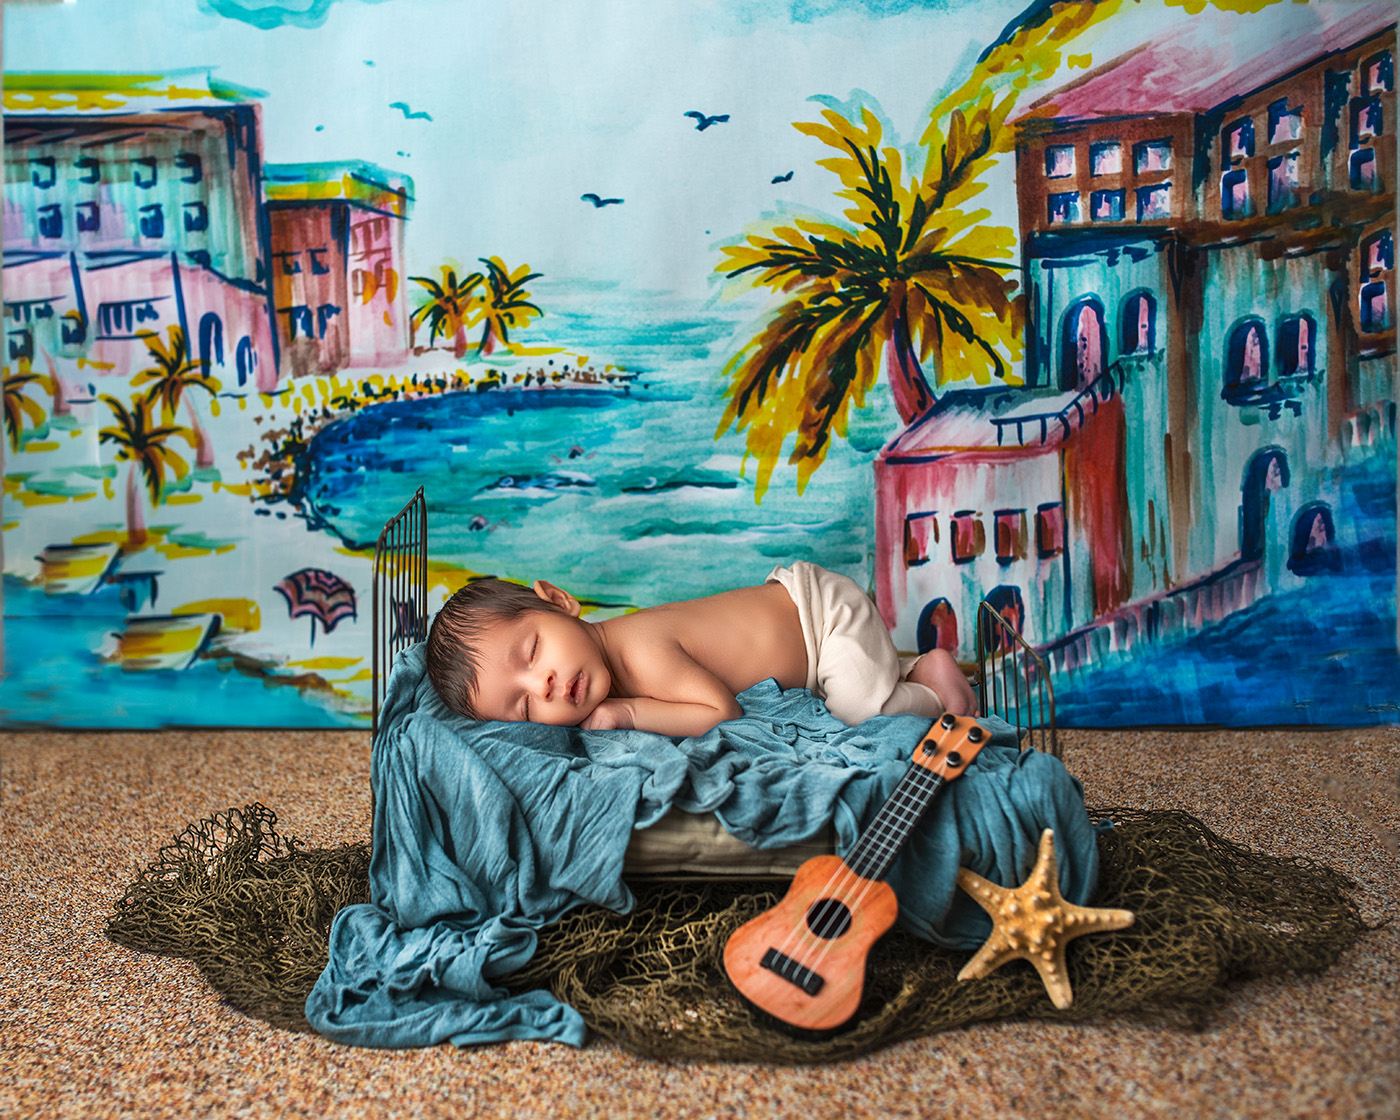 Newborn resting on cot against watercolor beach town backdrop.